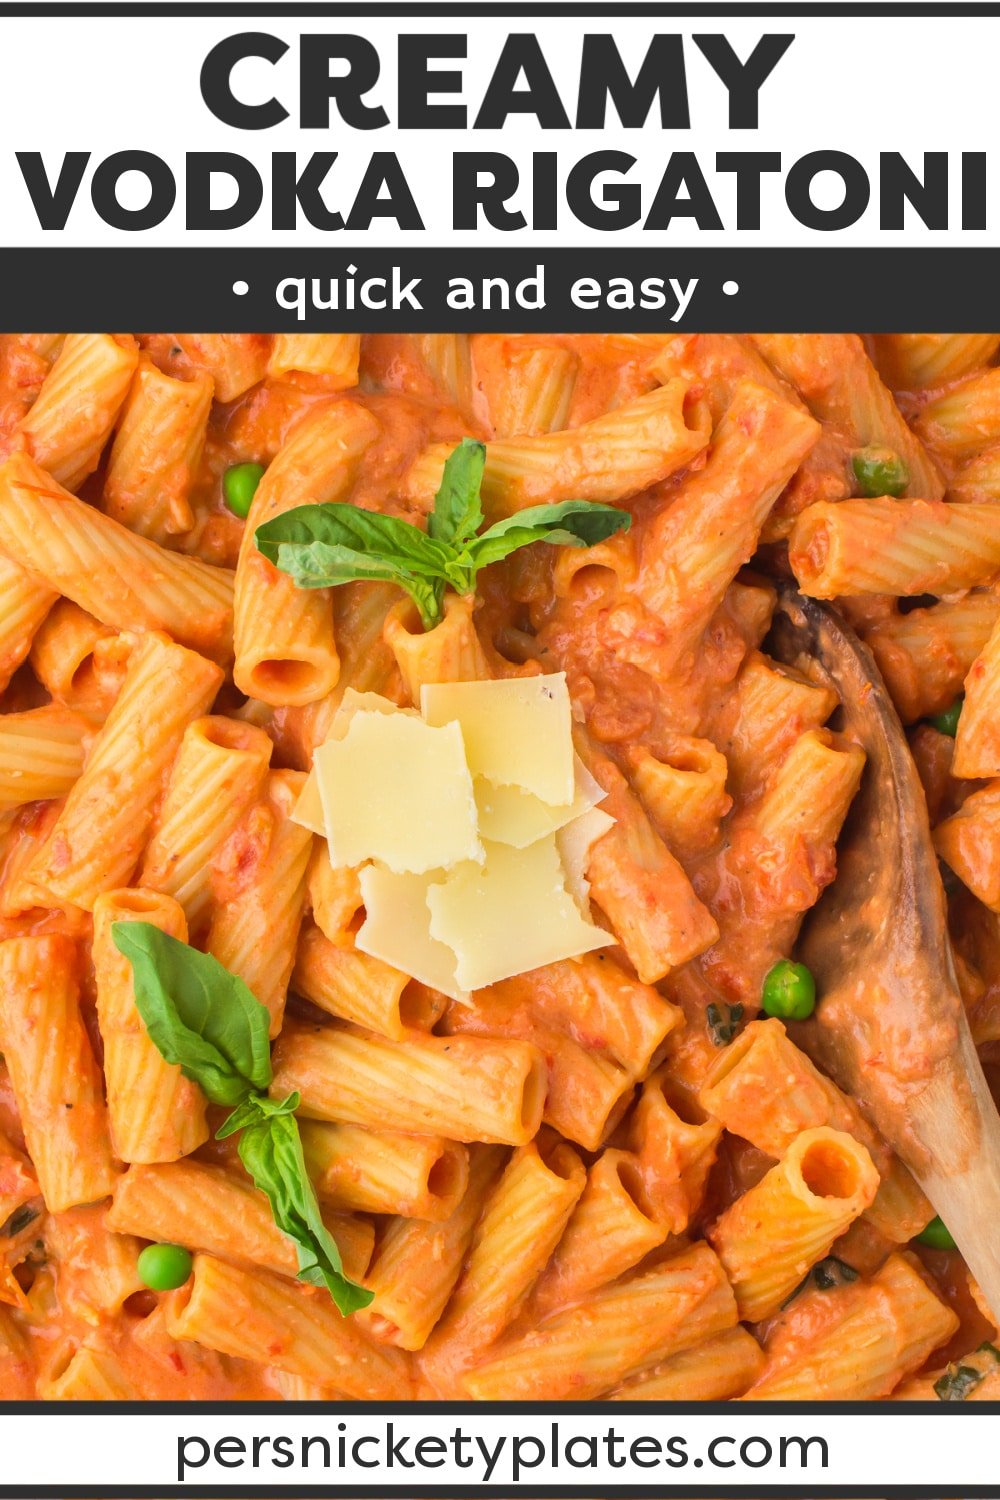 Vodka Rigatoni is a scrumptious pasta dish made with al dente pasta tossed in a rich vodka sauce made with tomatoes, heavy cream, an ounce of vodka, and parmesan cheese. Finished with fresh basil and peas, this easy and elegant one-pan meal is perfect for busy weeknights and fancier occasions!  | www.persnicketyplates.com